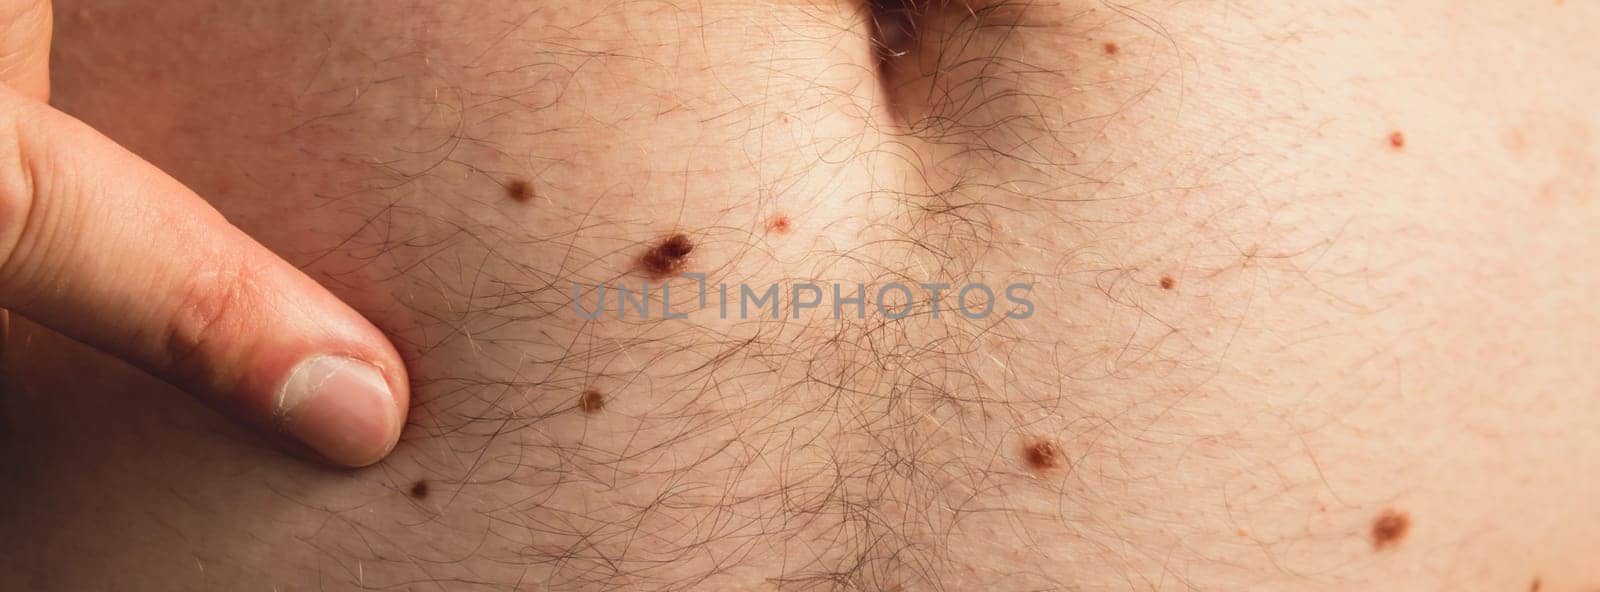 Unrecognizable man showing his birthmarks on skin Close up detail of the bare skin Sun Exposure effect on skin. Health Effects of UV Radiation Male with birthmarks Pigmentation by anna_stasiia